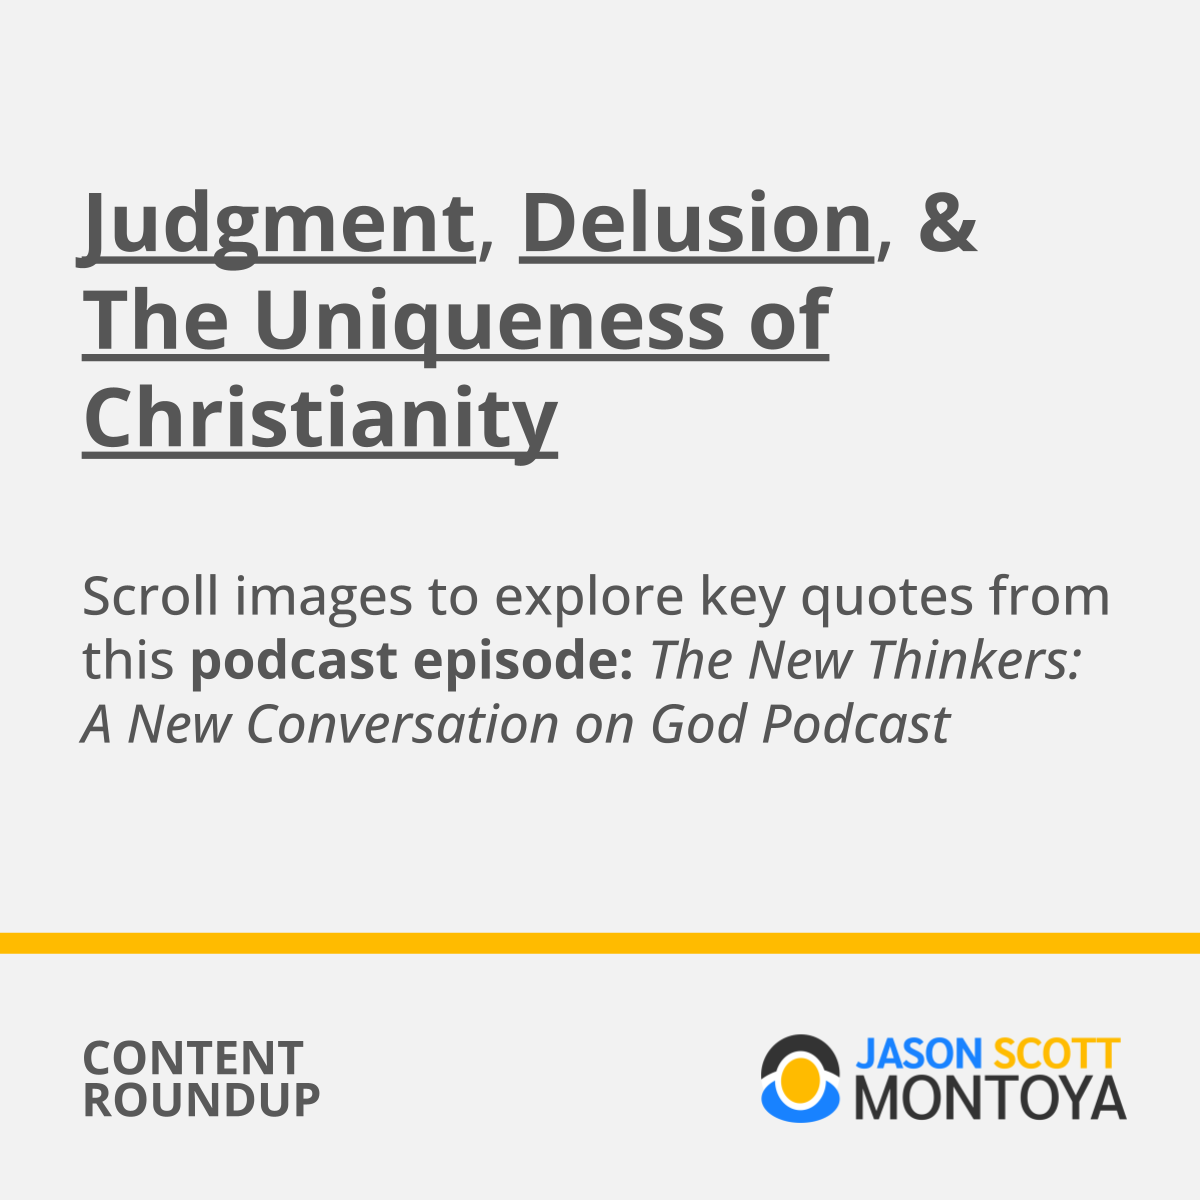 Judgment, Delusion, & The Uniqueness of Christianity   Scroll images to explore key quotes from this podcast episode: The New Thinkers: A New Conversation on God Podcast